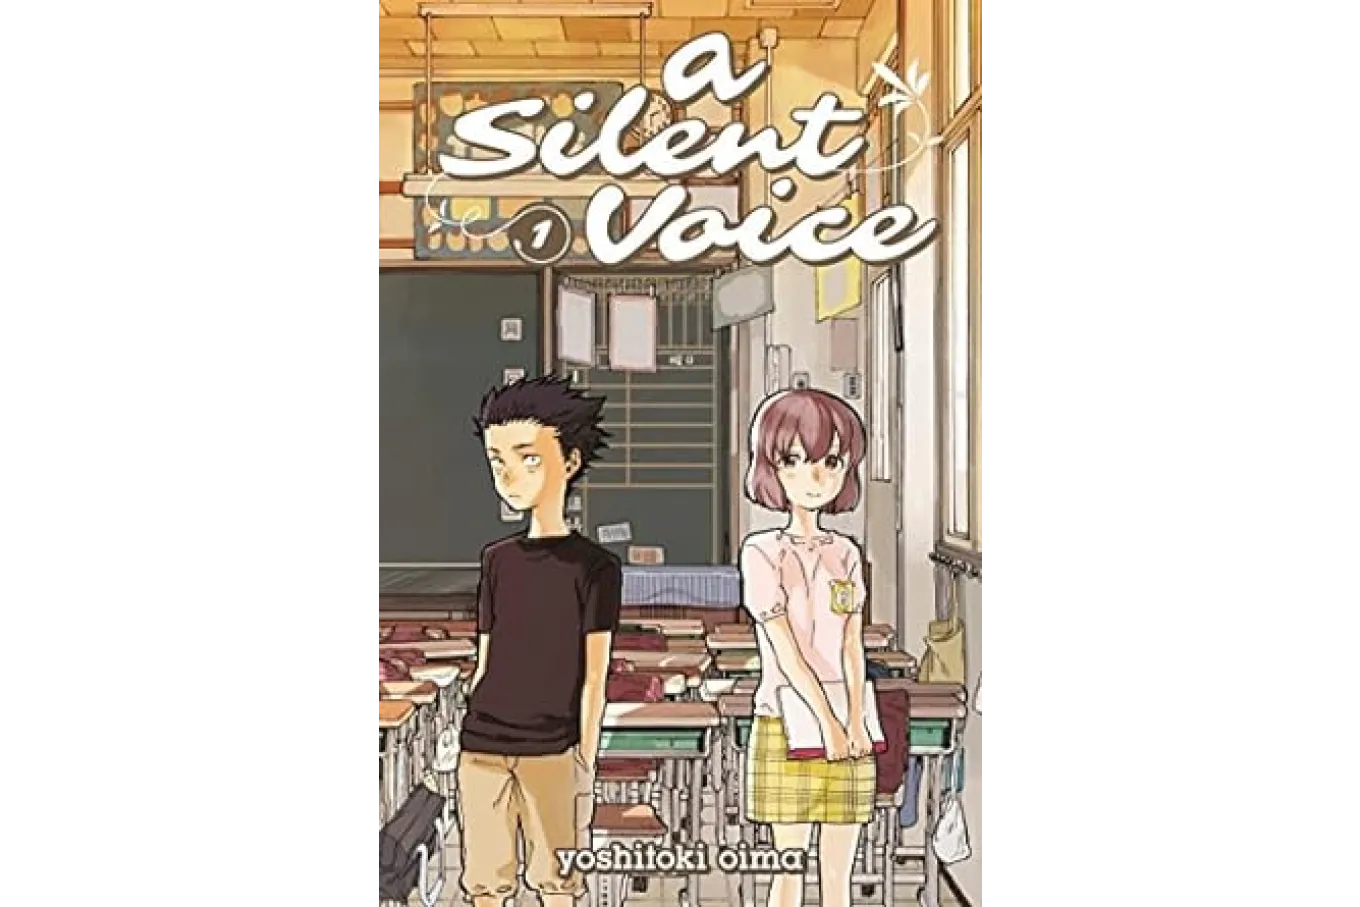 Cover of a Silent Voice